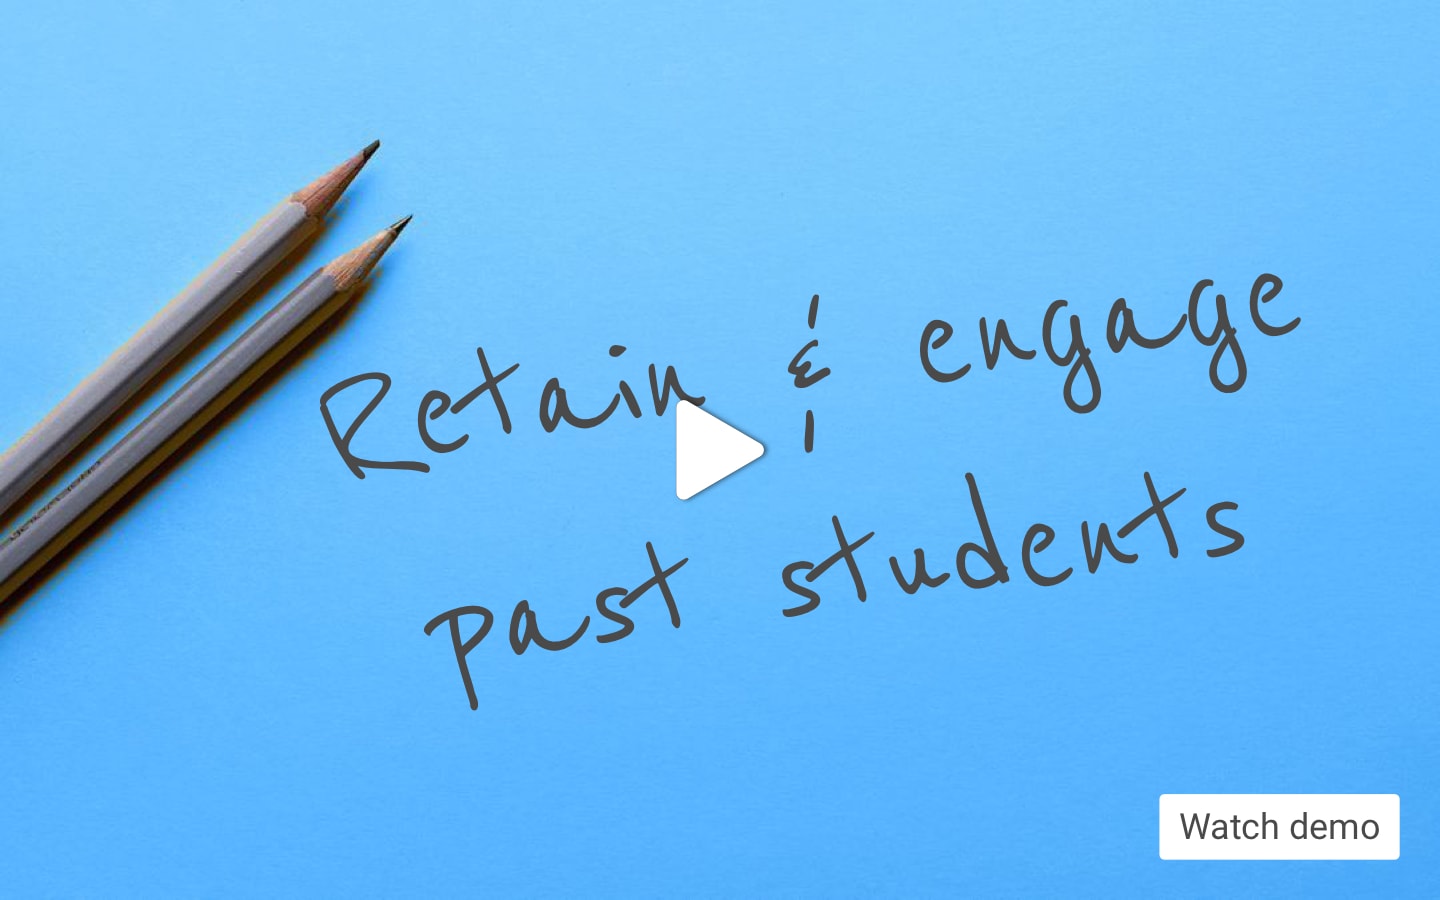 Retain & engage past students